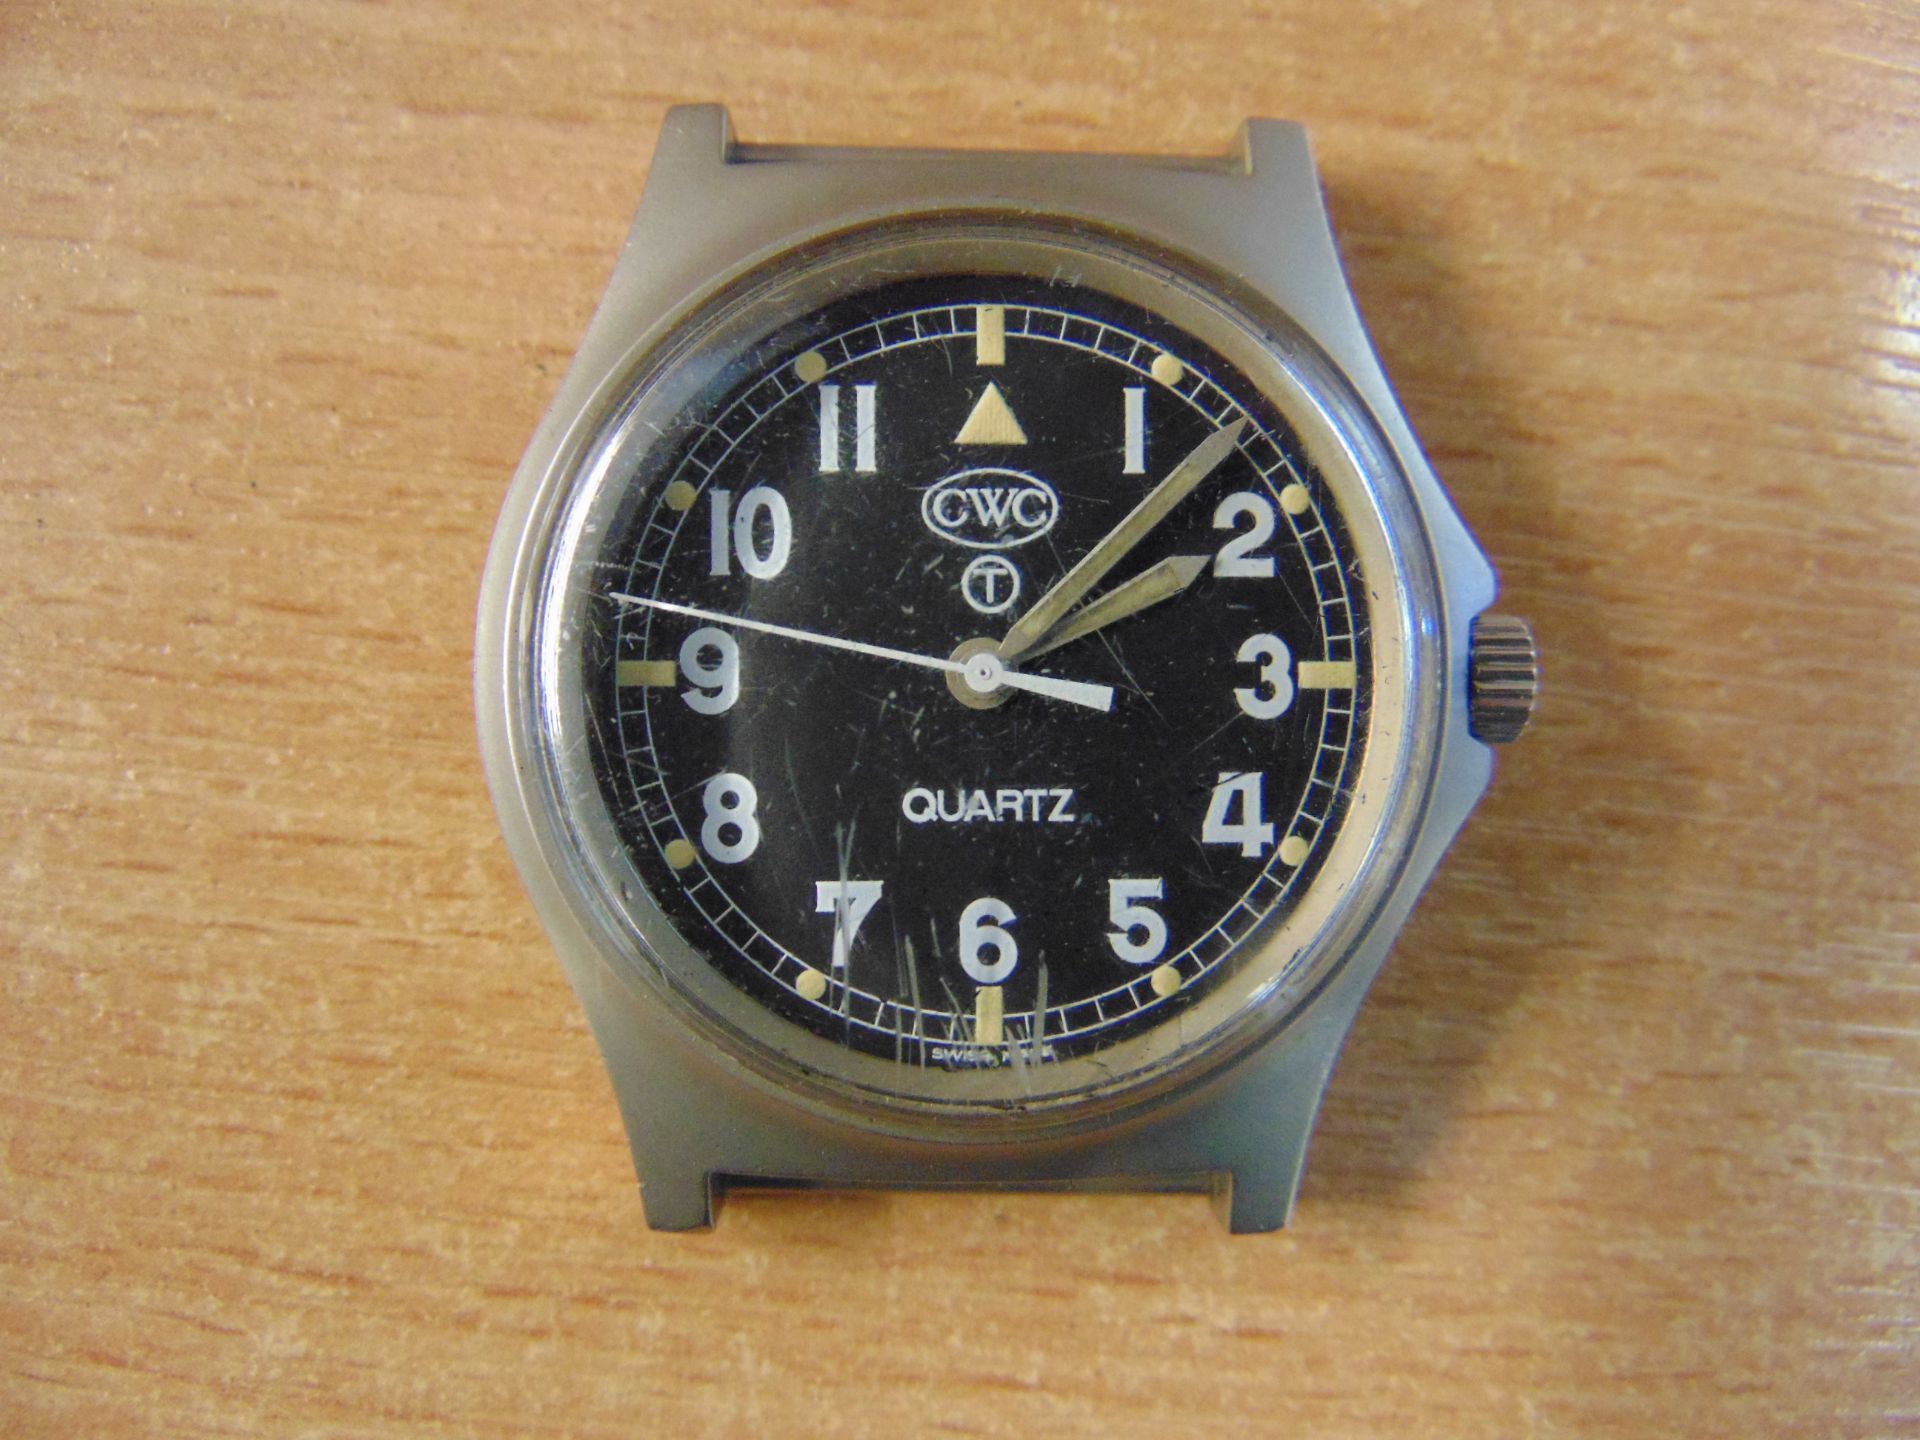 CWC W10 BRITISH ARMY SERVICE WATCH NATO MARKED DATED 1998 - Image 2 of 5